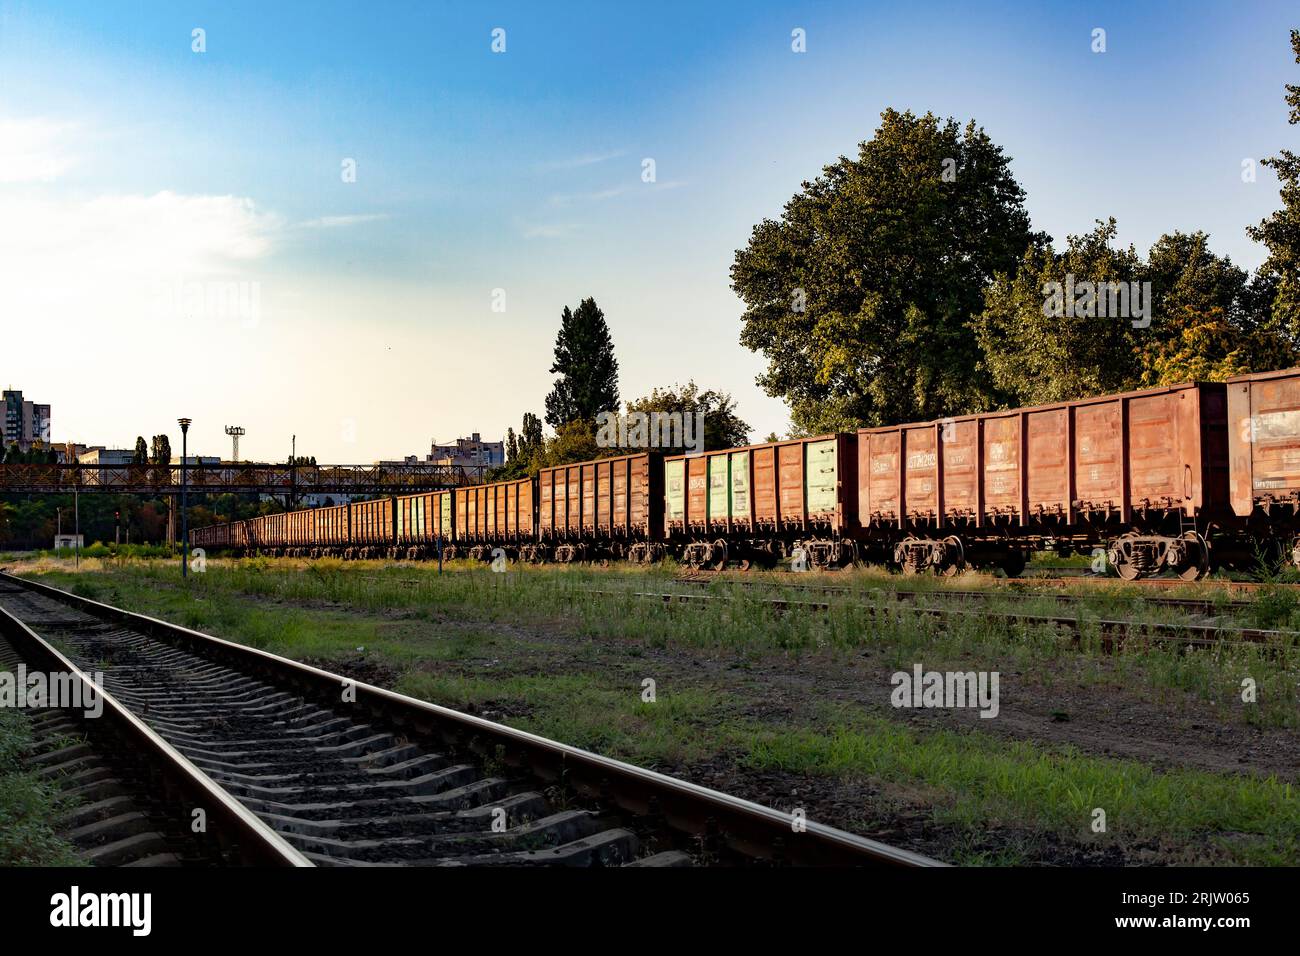 Freight wagons at a distribution logistics station. Export, import, trade. Railway logistics concept. Stock Photo